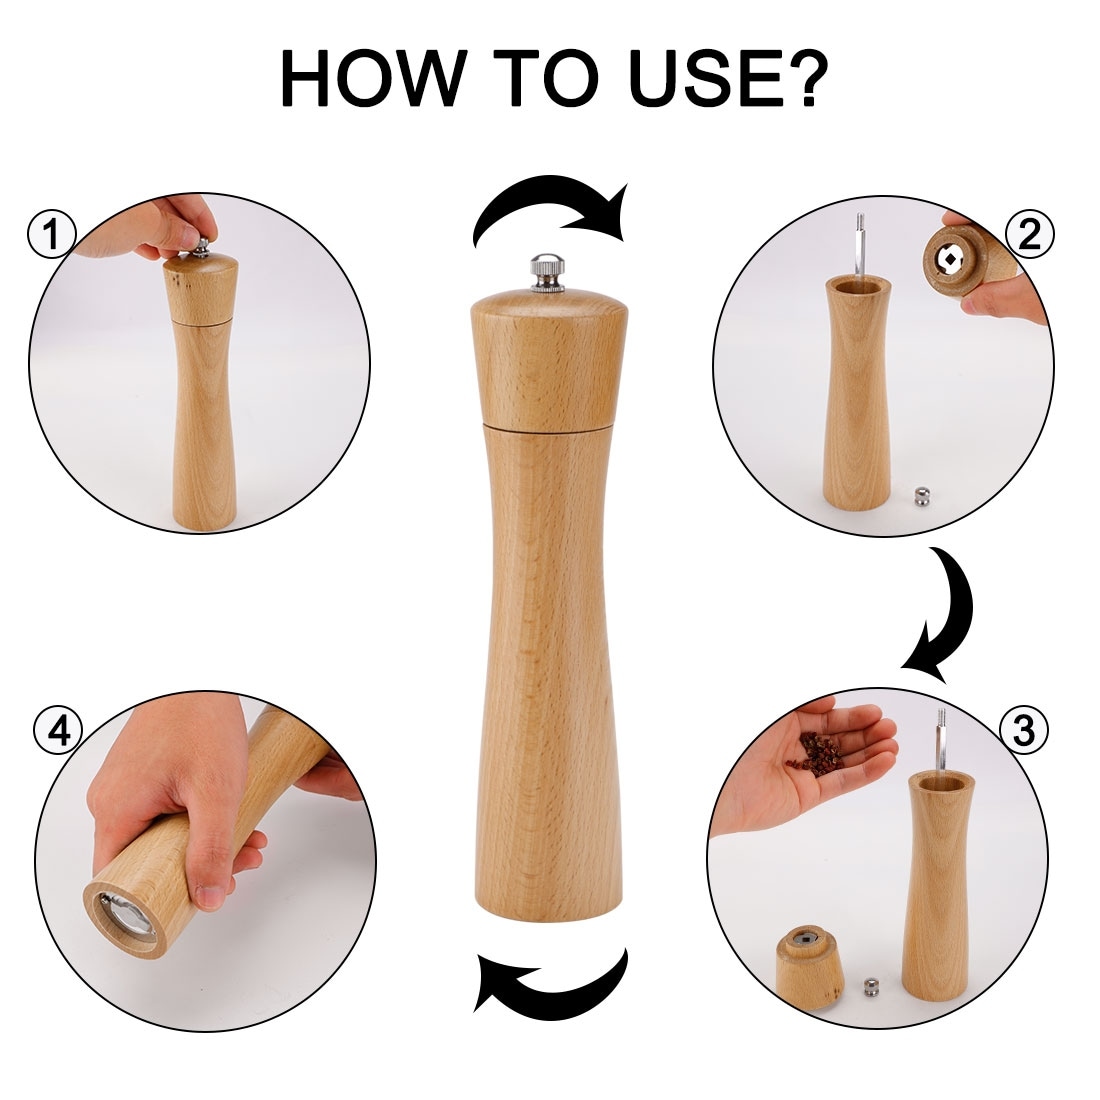 https://ak1.ostkcdn.com/images/products/is/images/direct/a76e5a5bccdcfbc789aced395e39ed8b340004ee/Salt-and-Pepper-Grinder-Wooden-Mills-Shaker-w-Adjustable-Coarseness.jpg